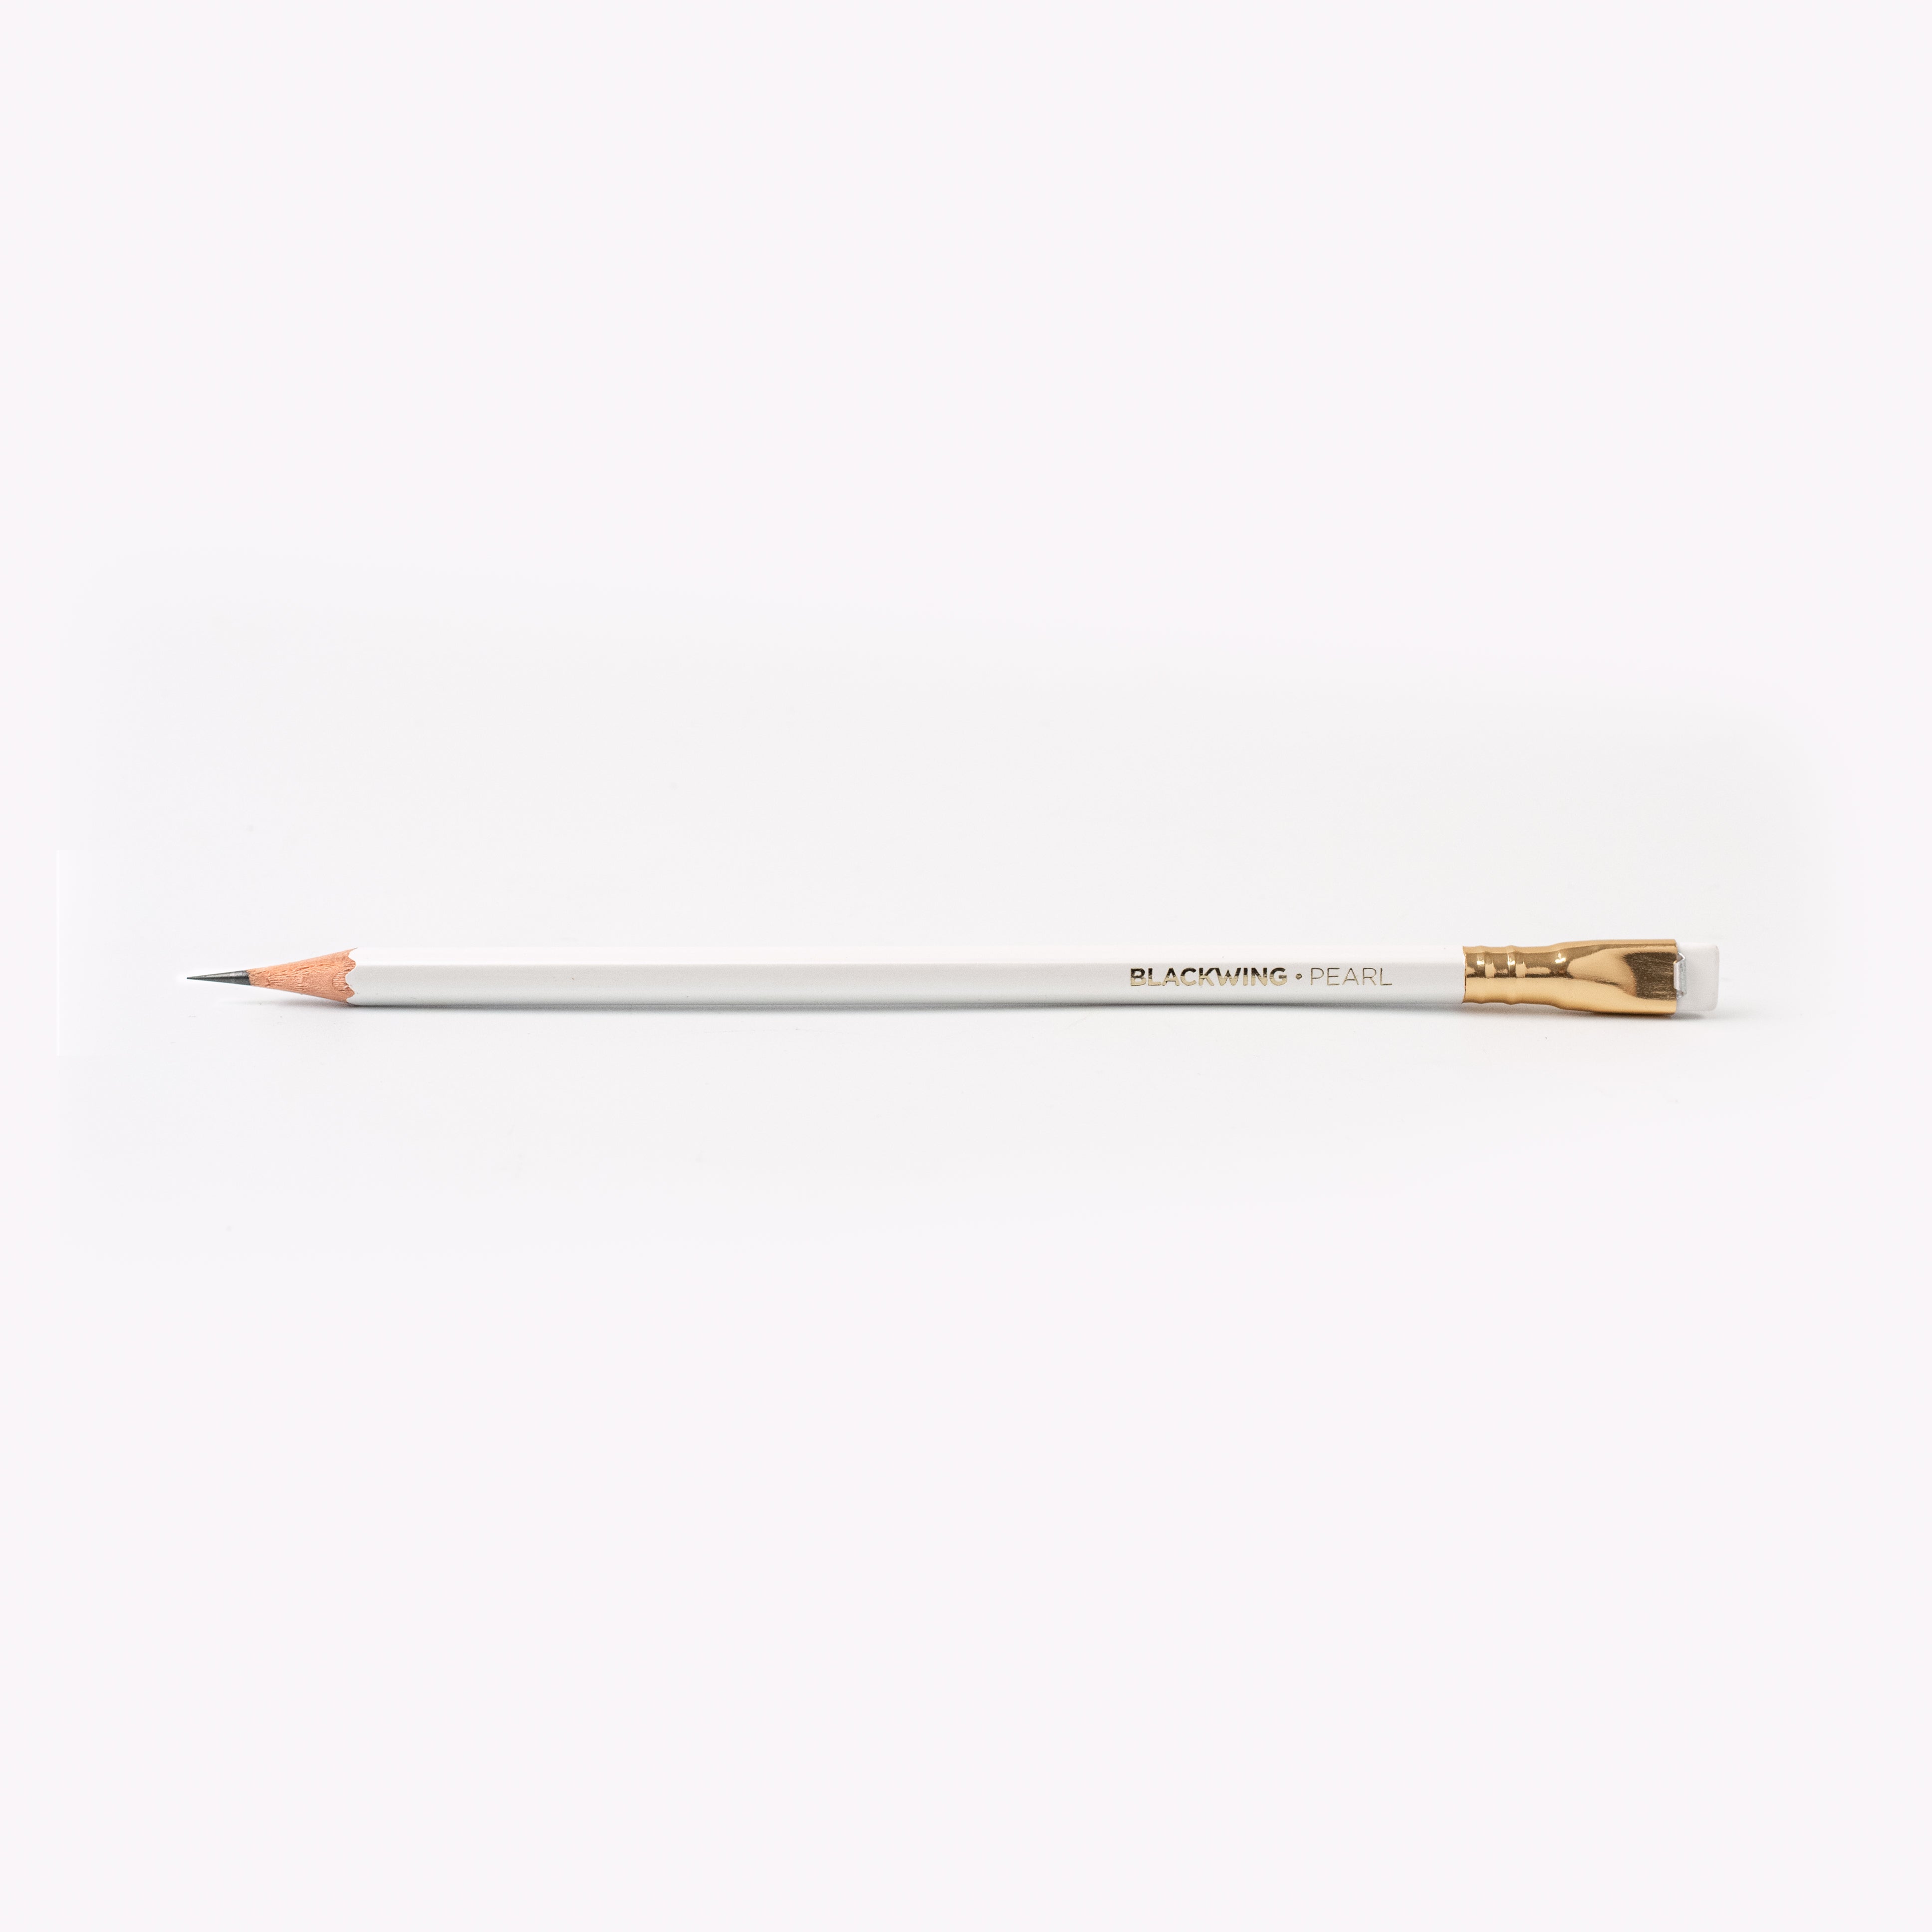 A Blackwing Pearl pencil with a graphite core on a white surface.